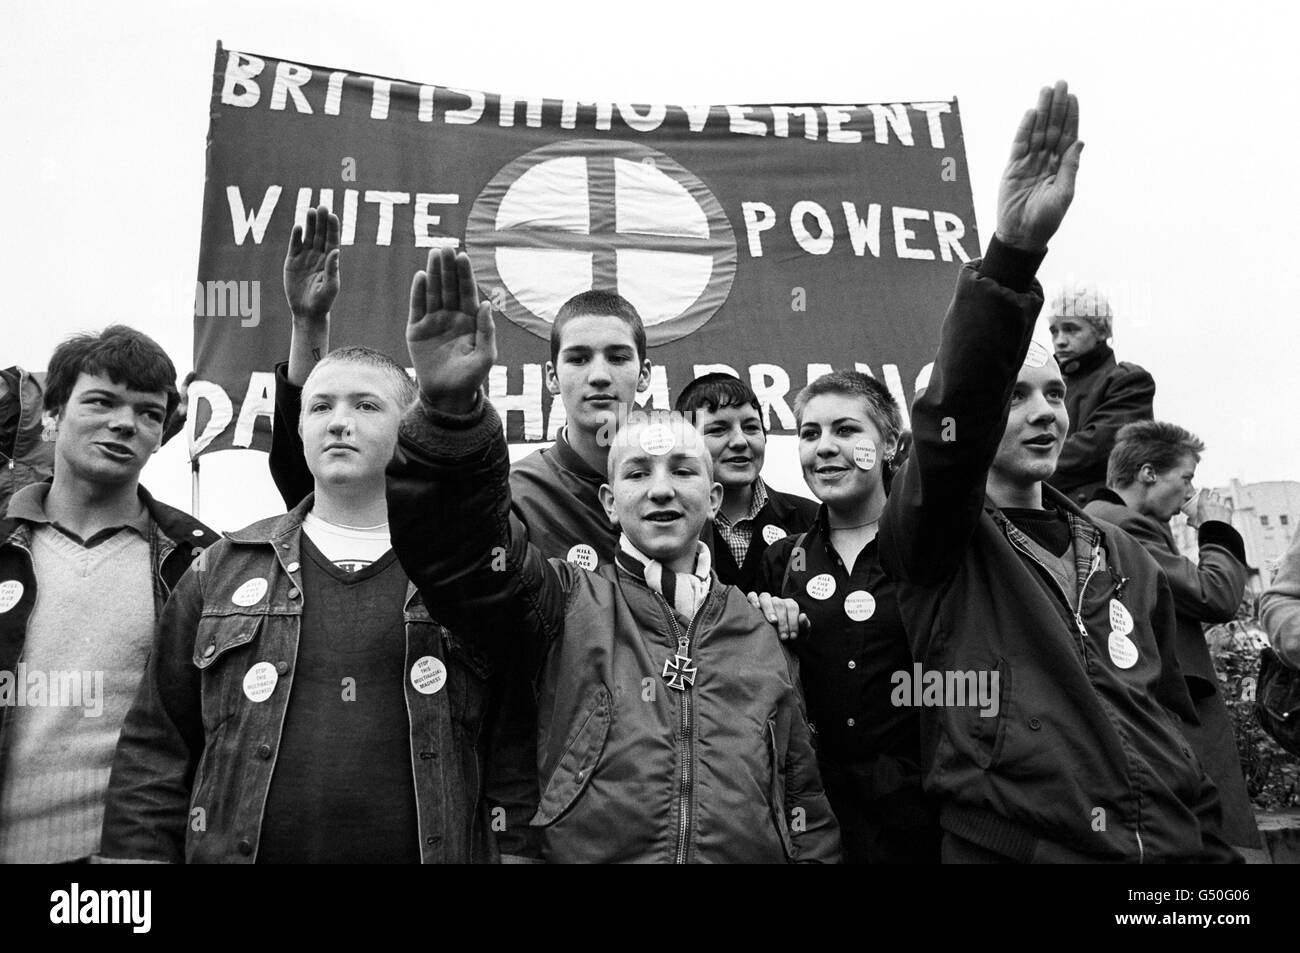 Members of the British Movement hold up a banner with 'White Power' and give Nazi salutes, during a march from Hyde Park, London, to Paddington Recreation Ground. Stock Photo